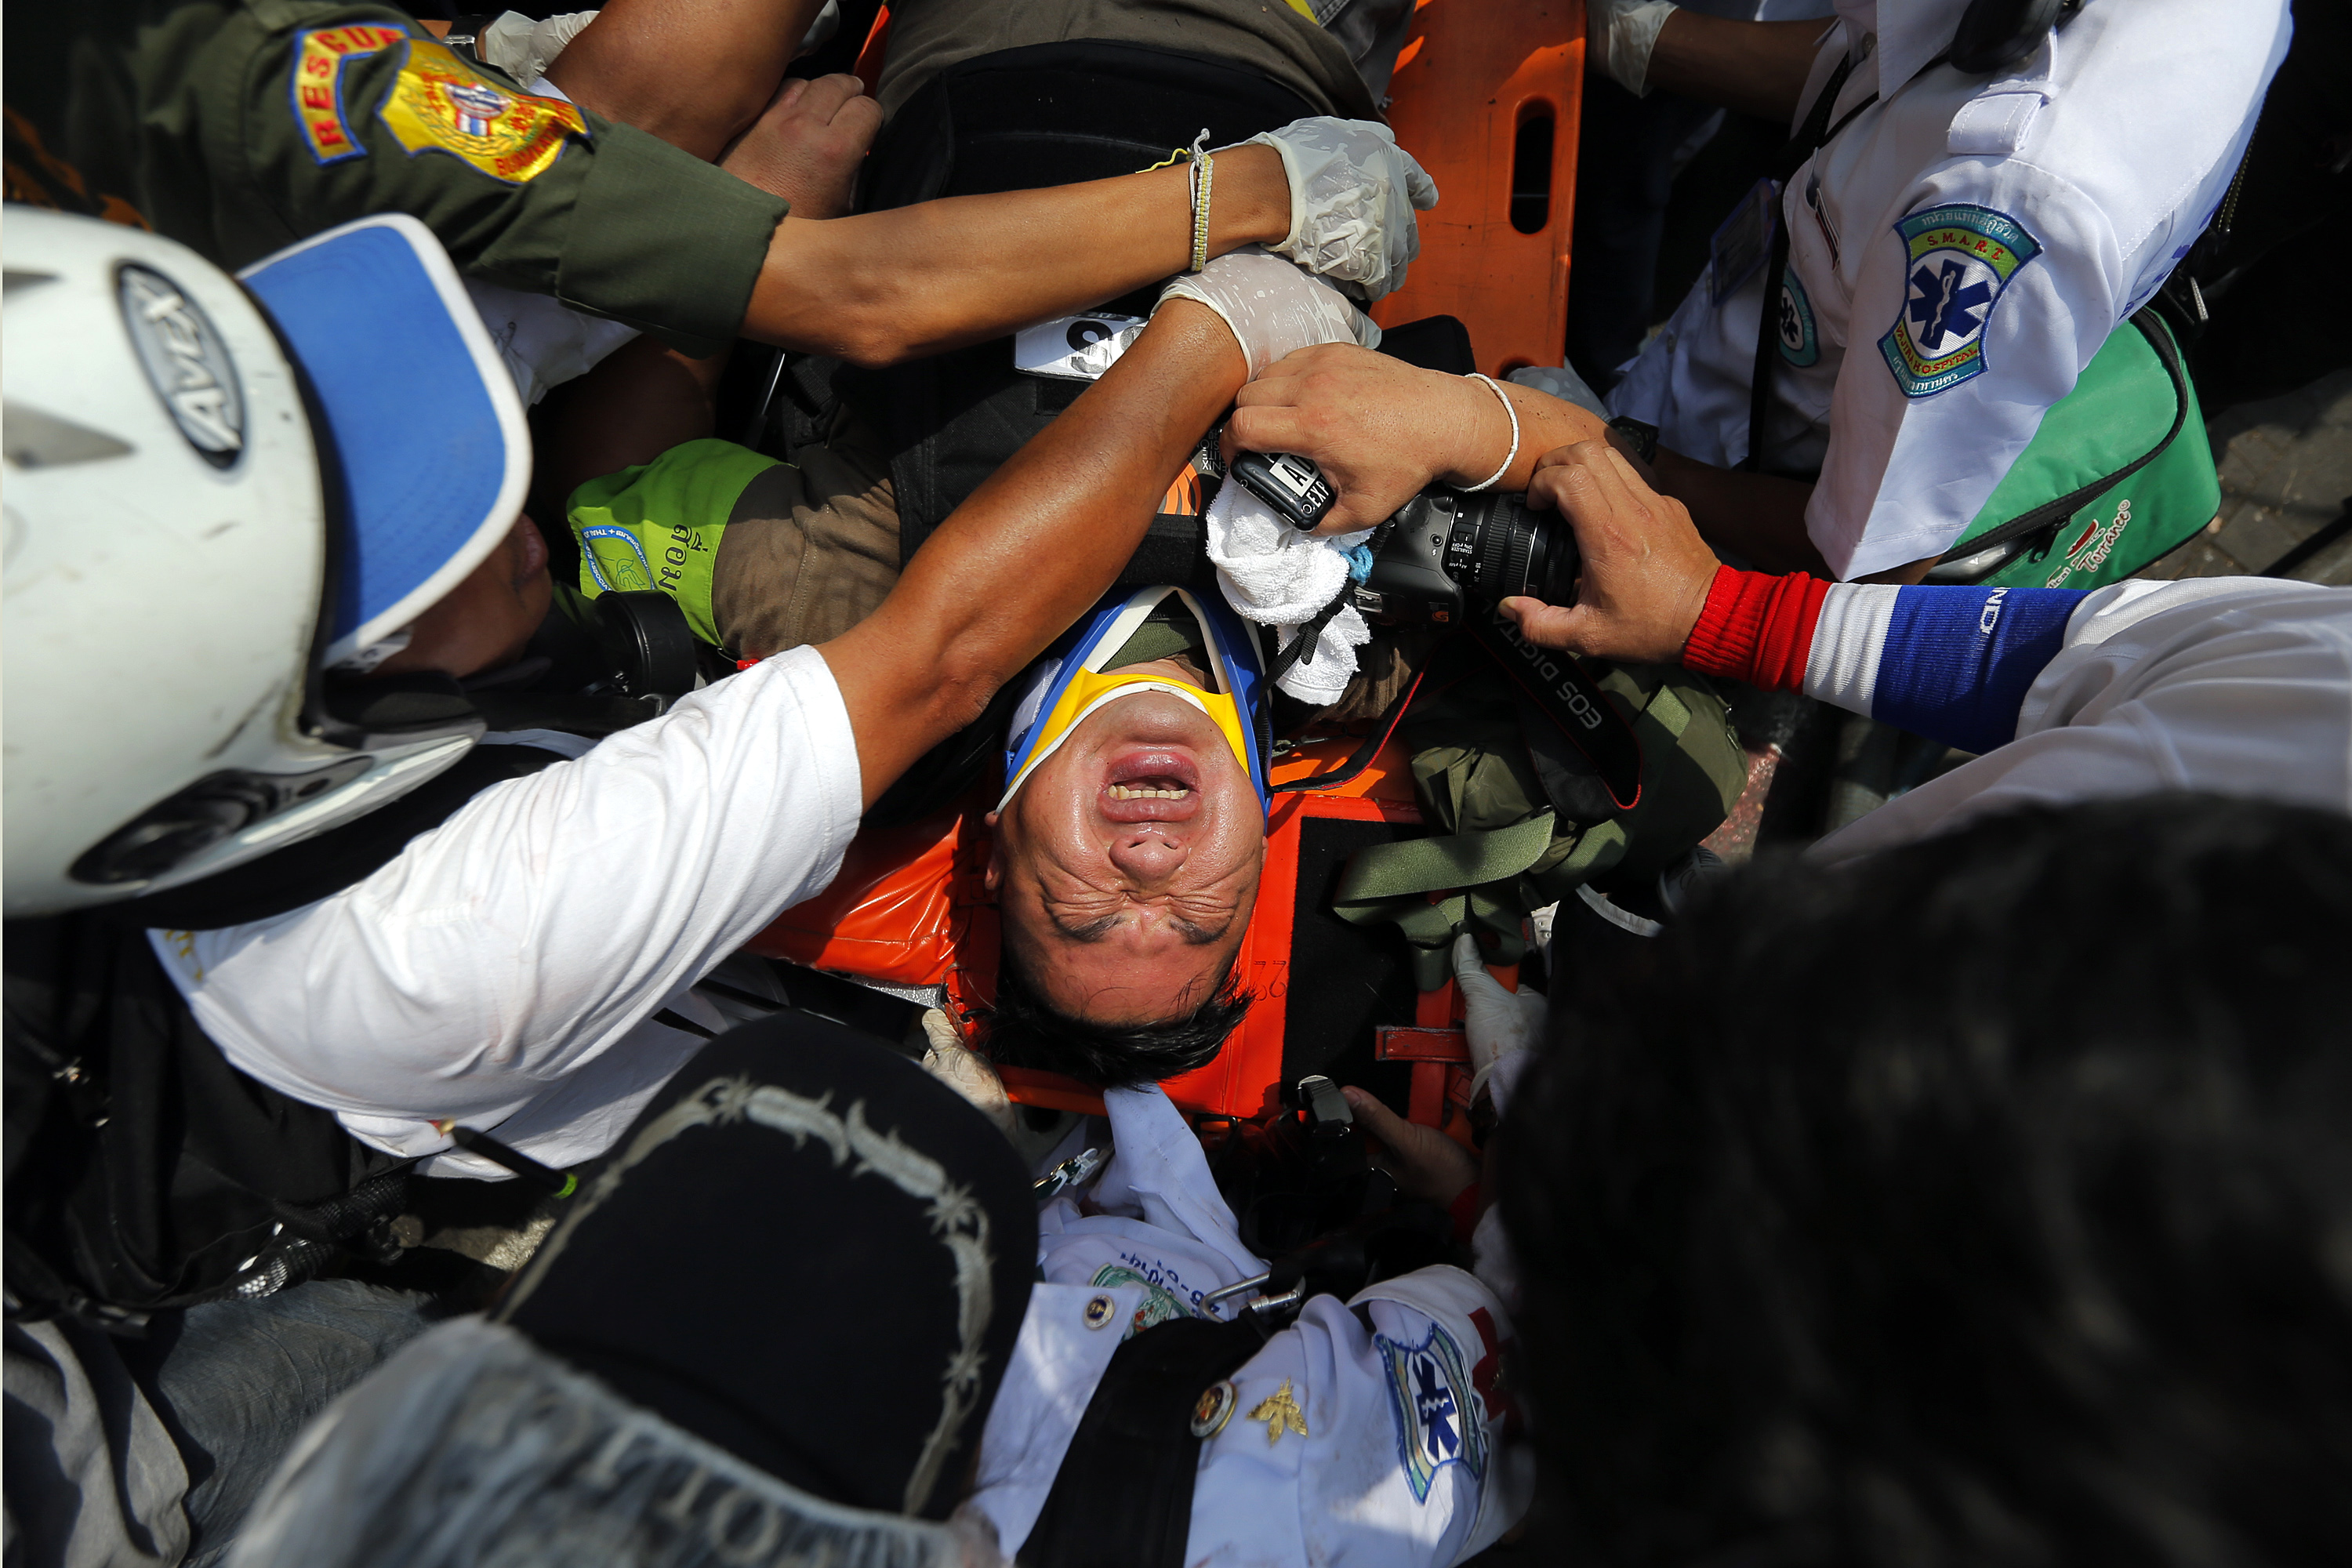 An injured reporter is taken to an ambulance during clashes between the police and anti-government protesters near the Government House in Bangkok, 18 February 2014